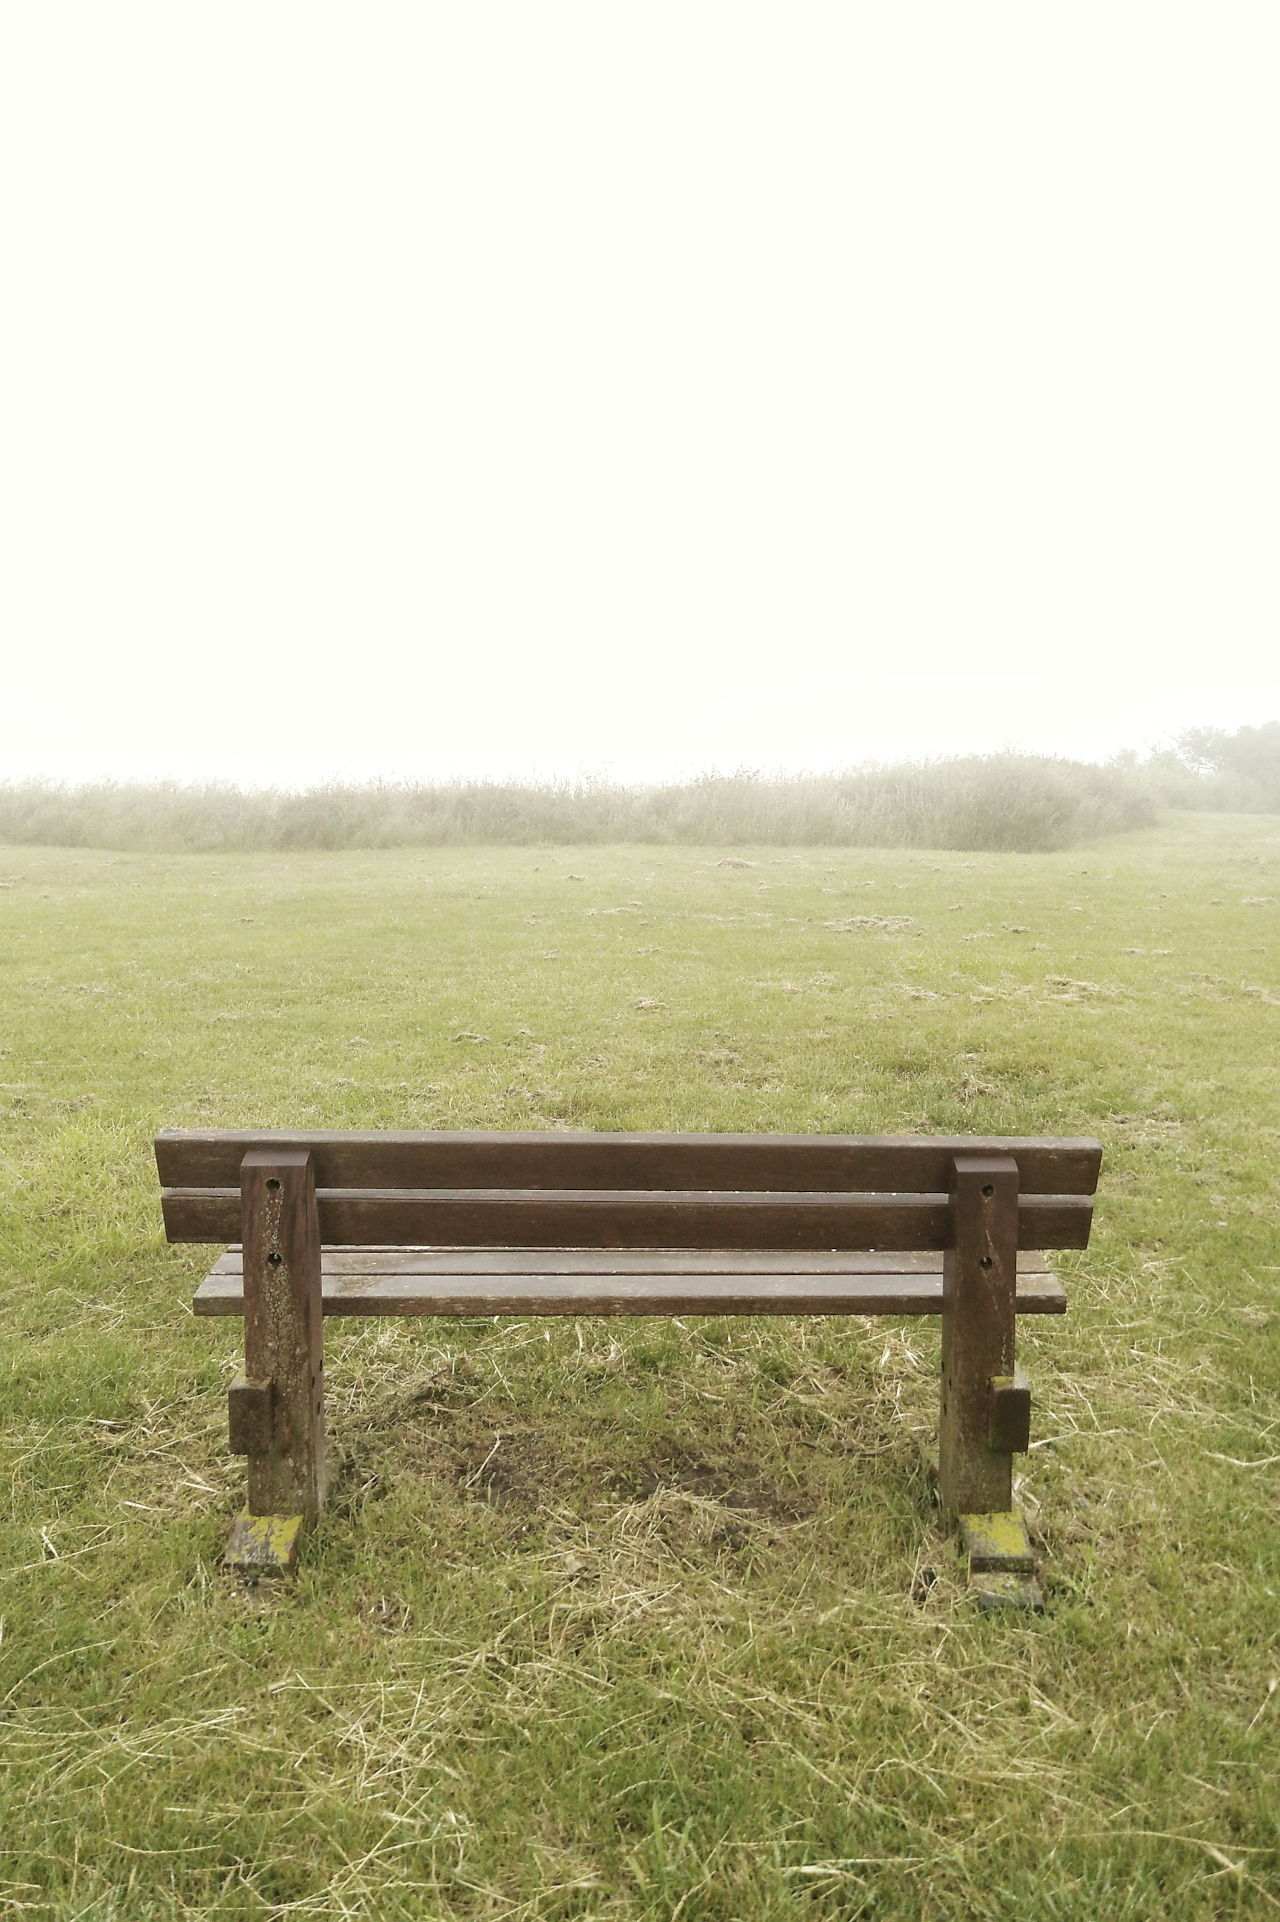 An empty bench sits facing a misty country landscape